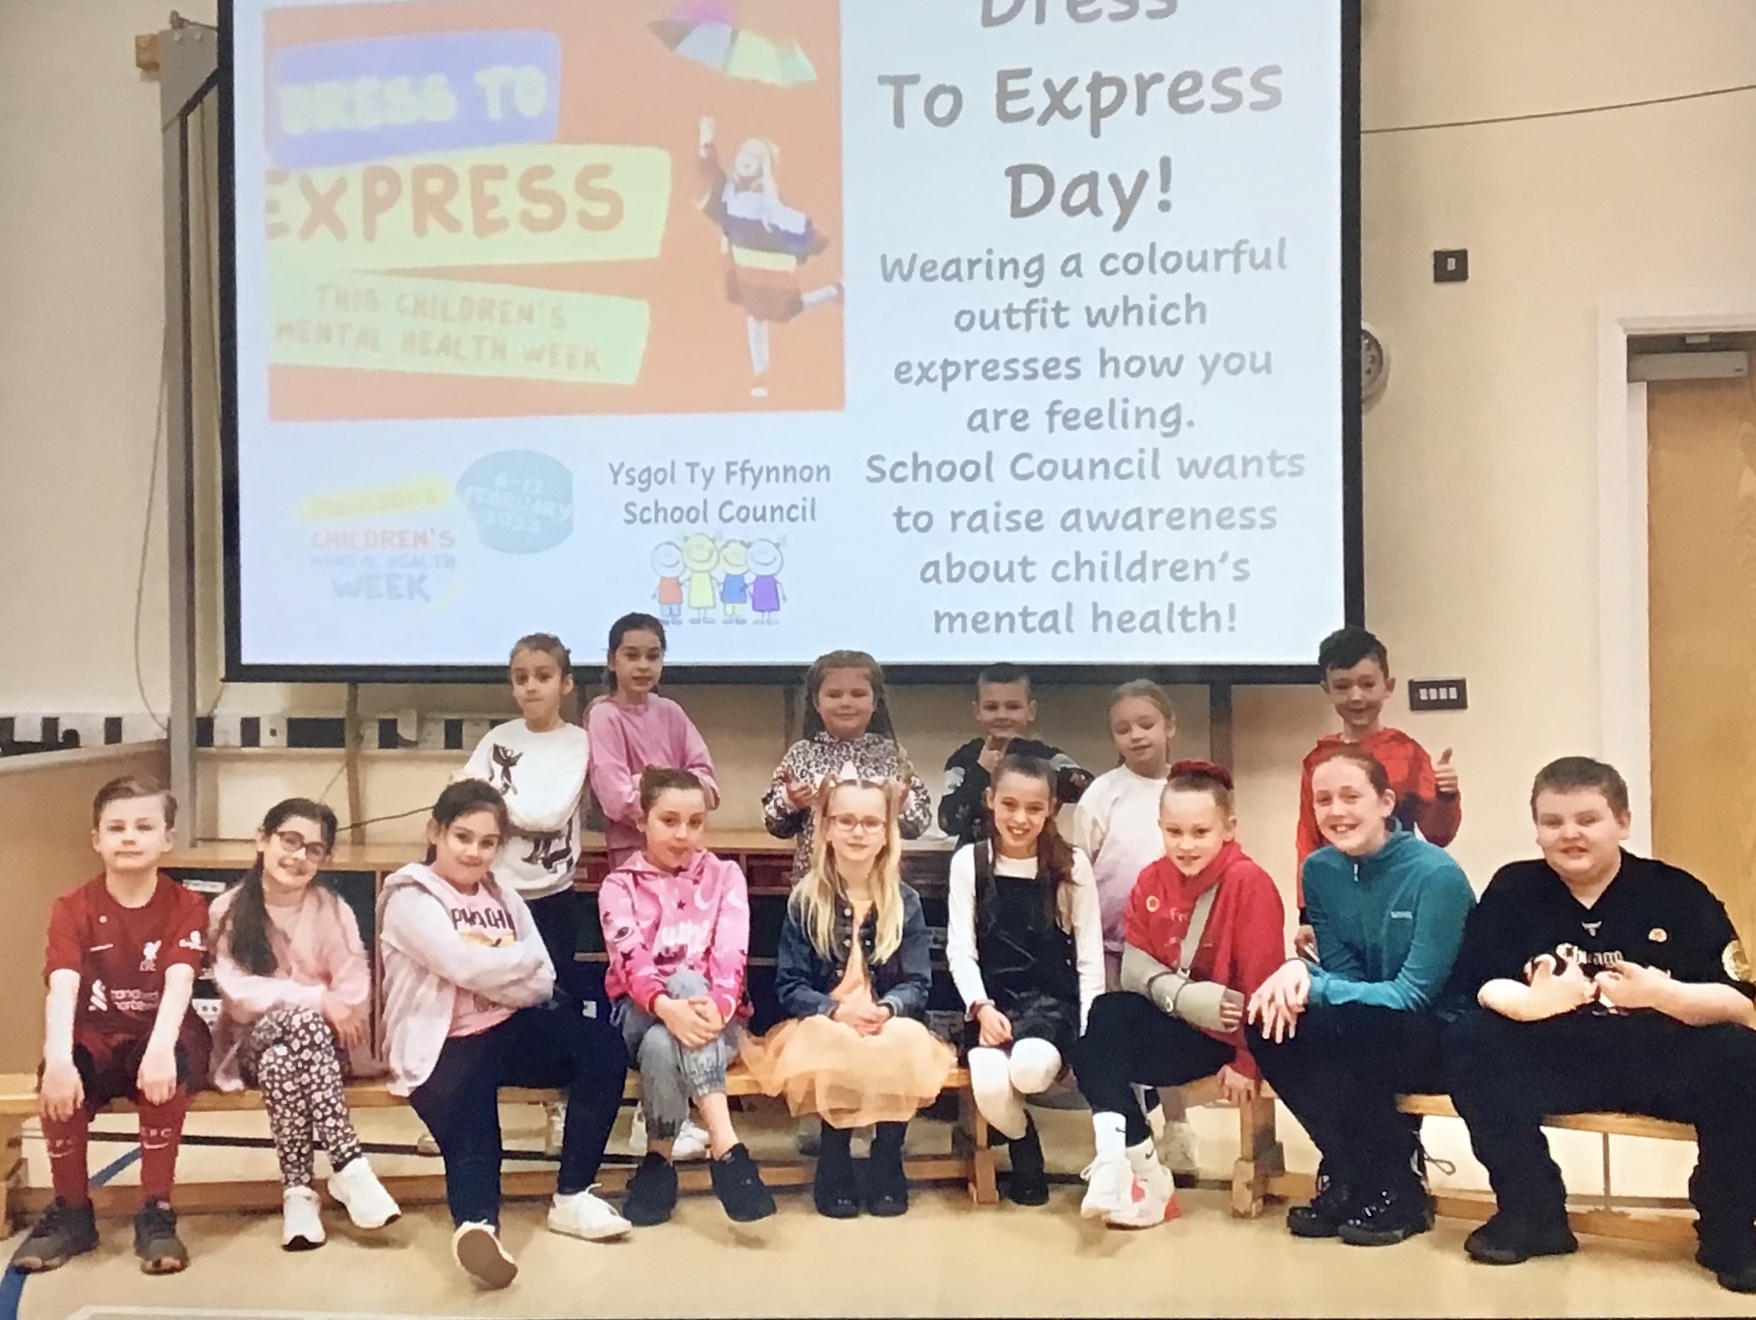 Ysgol Ty Ffynnon pupils during their Dress to Express Day.